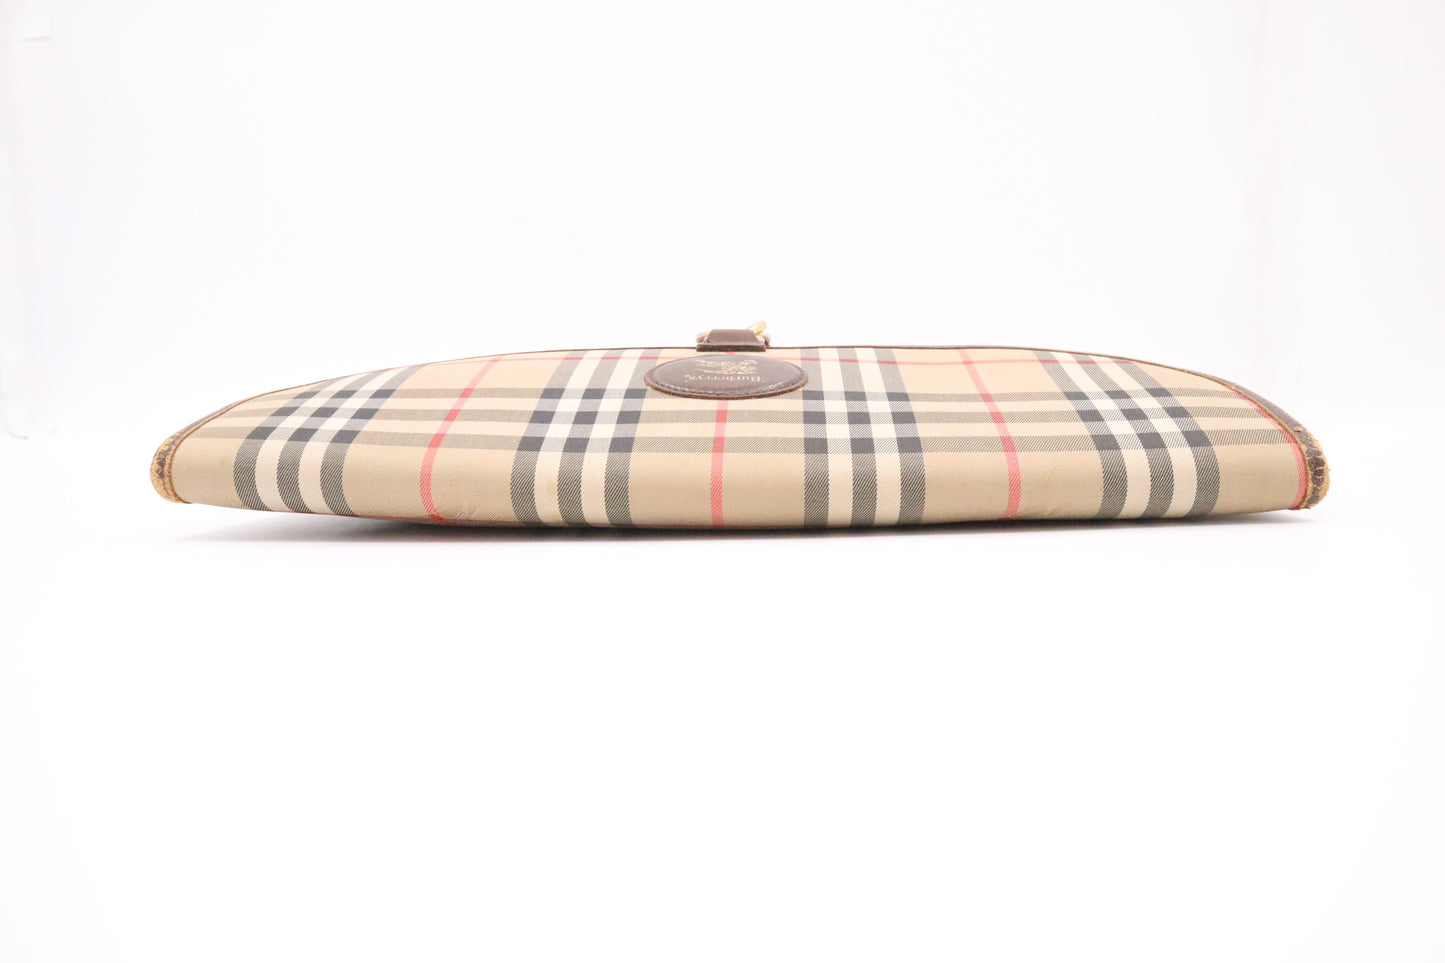 Burberry Clutch in House Check Canvas